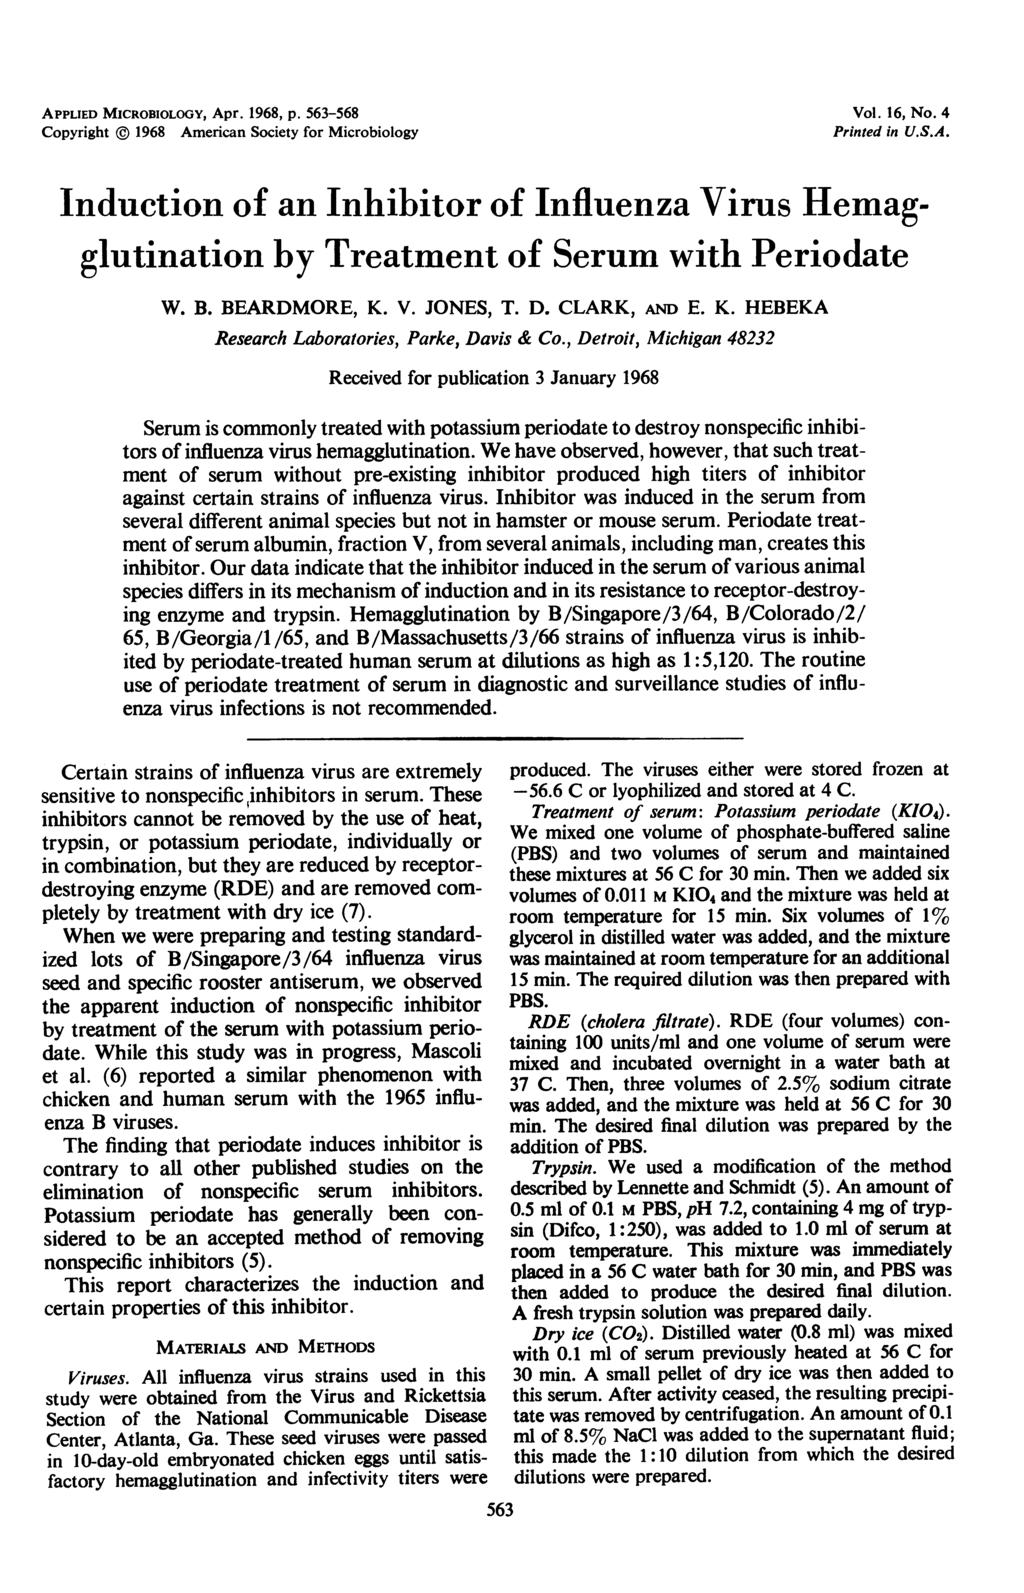 APPLIED MICROBIOLOGY, Apr. 1968, p. 563-568 Copyright @ 1968 American Society for Microbiology Vol. 16, No. 4 Printed in U.S.A. Induction of an Inhibitor of Influenza Virus Hemagglutination by Treatment of Serum with Periodate W.